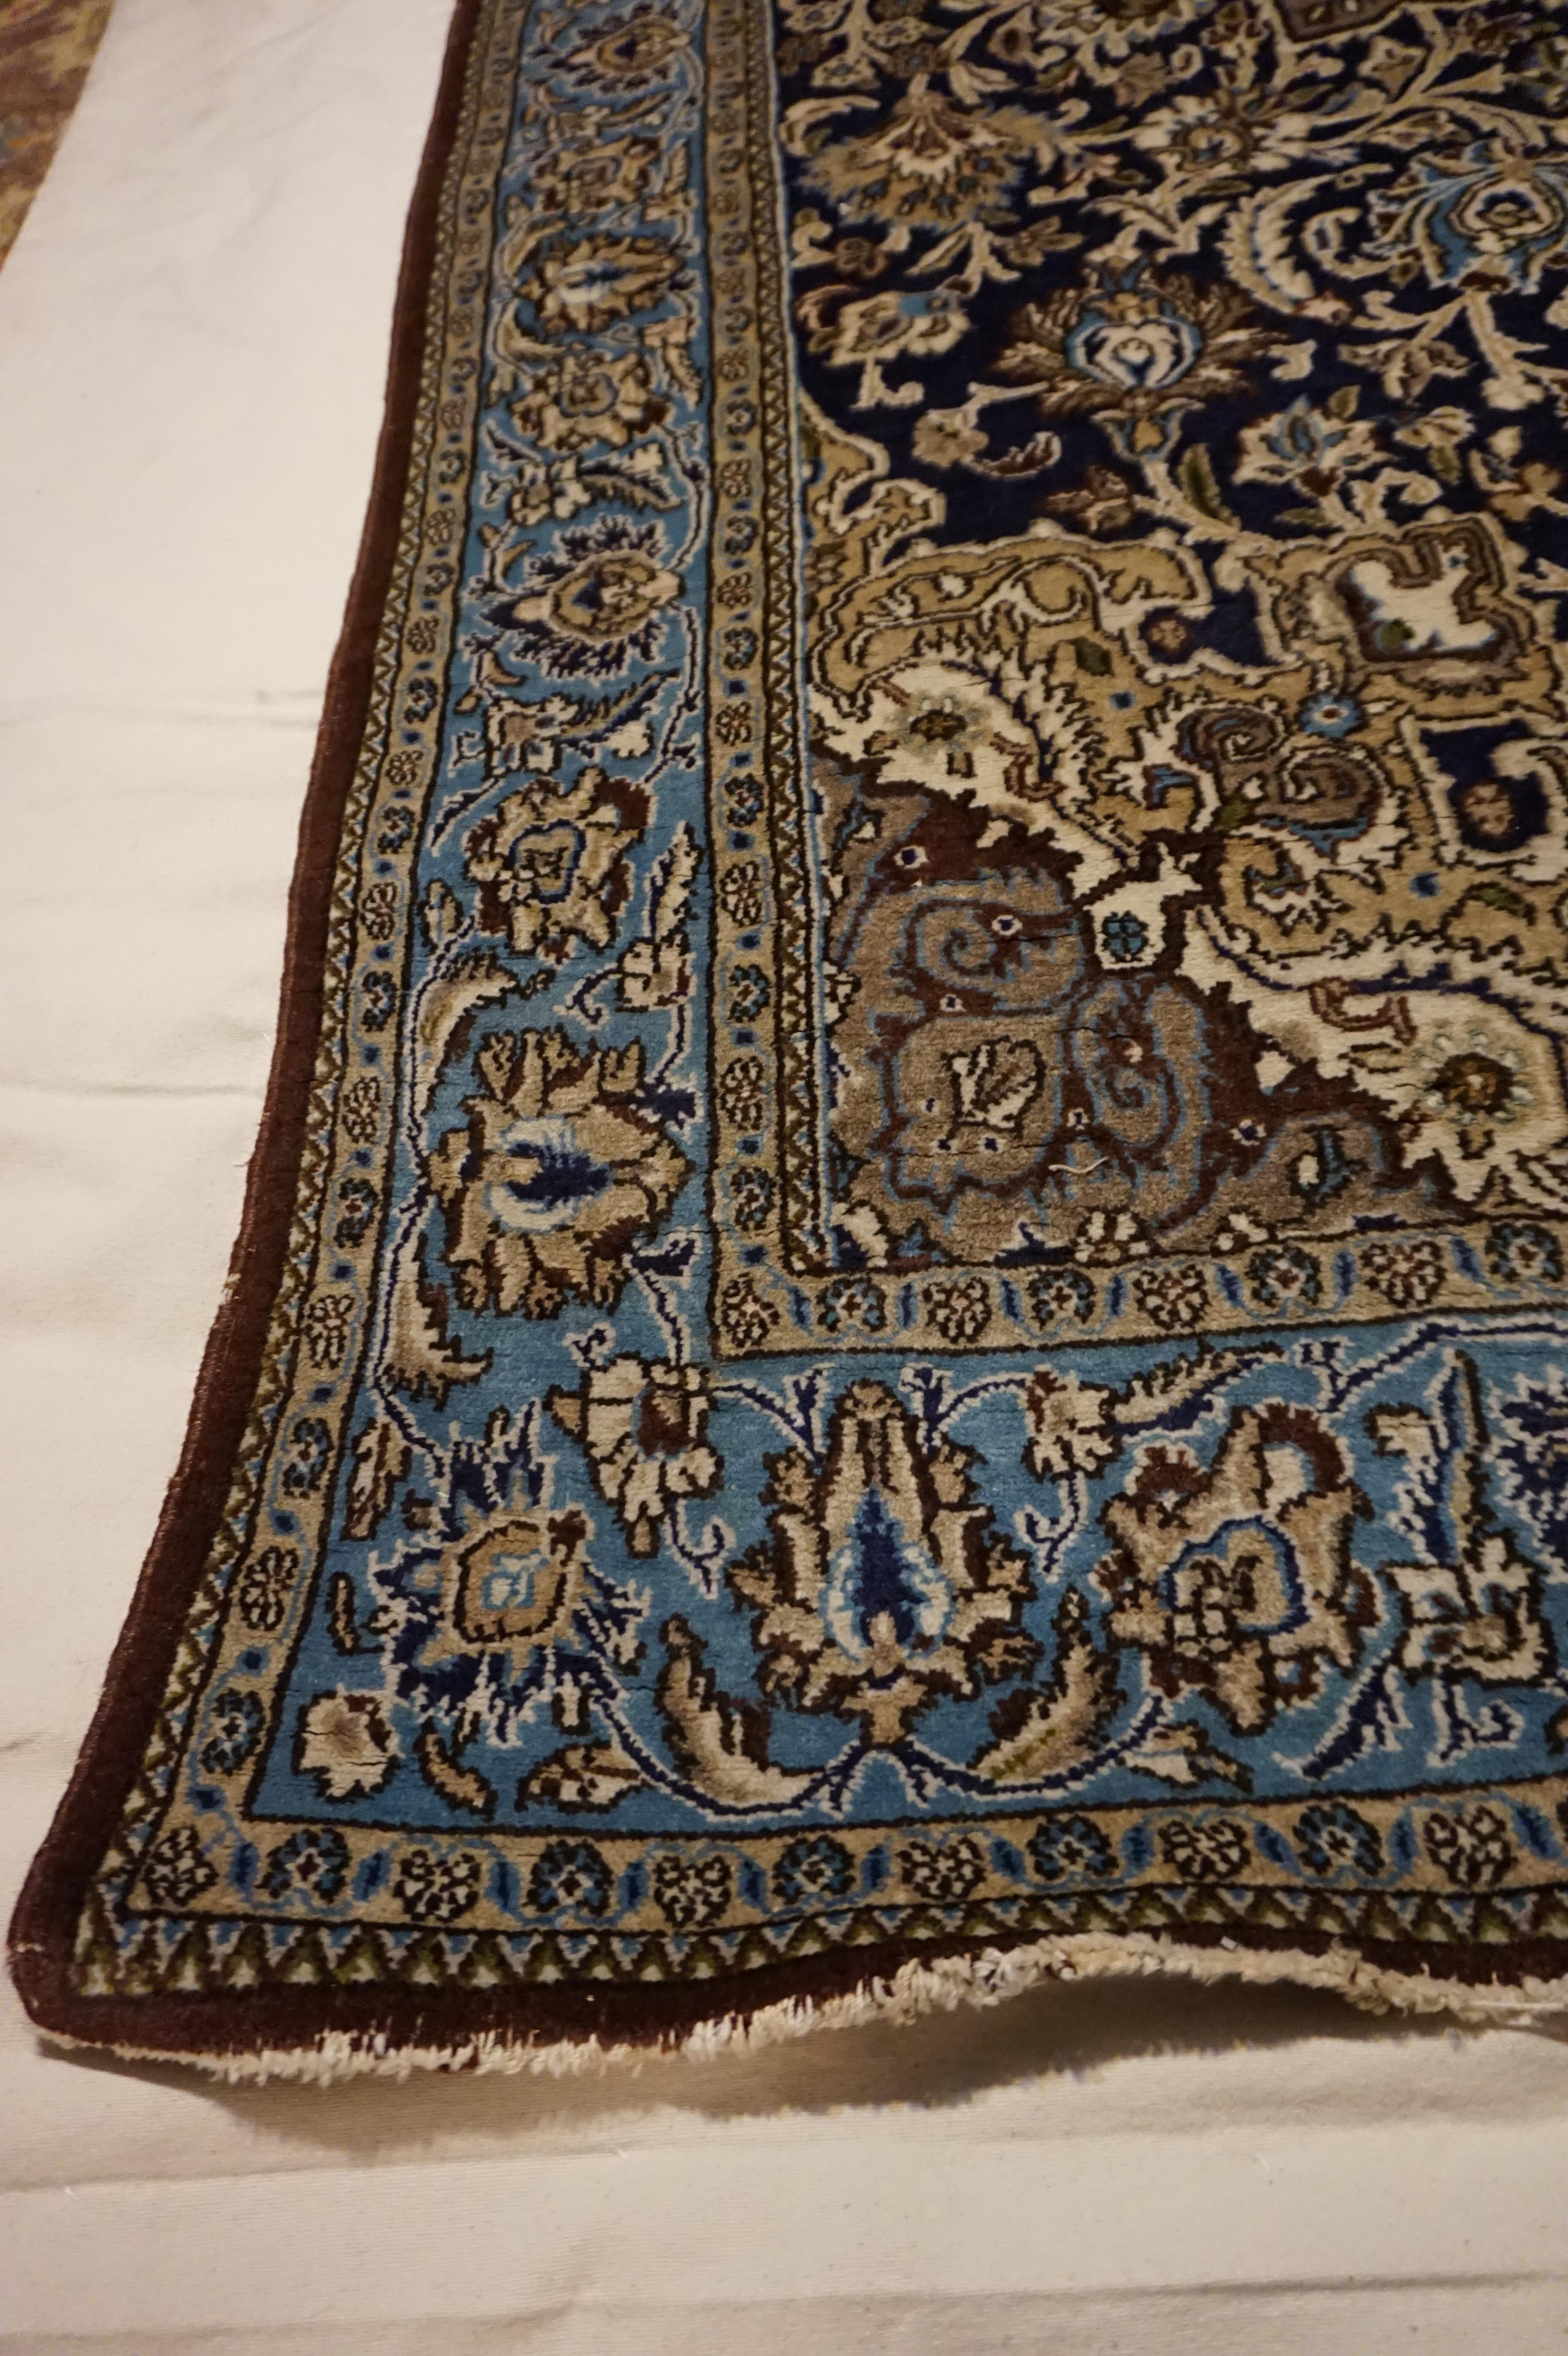 Hand-Knotted Antique Kashmir Kashan Rug Hand-knotted In Pure Wool In Indigo, Blues & Browns For Sale